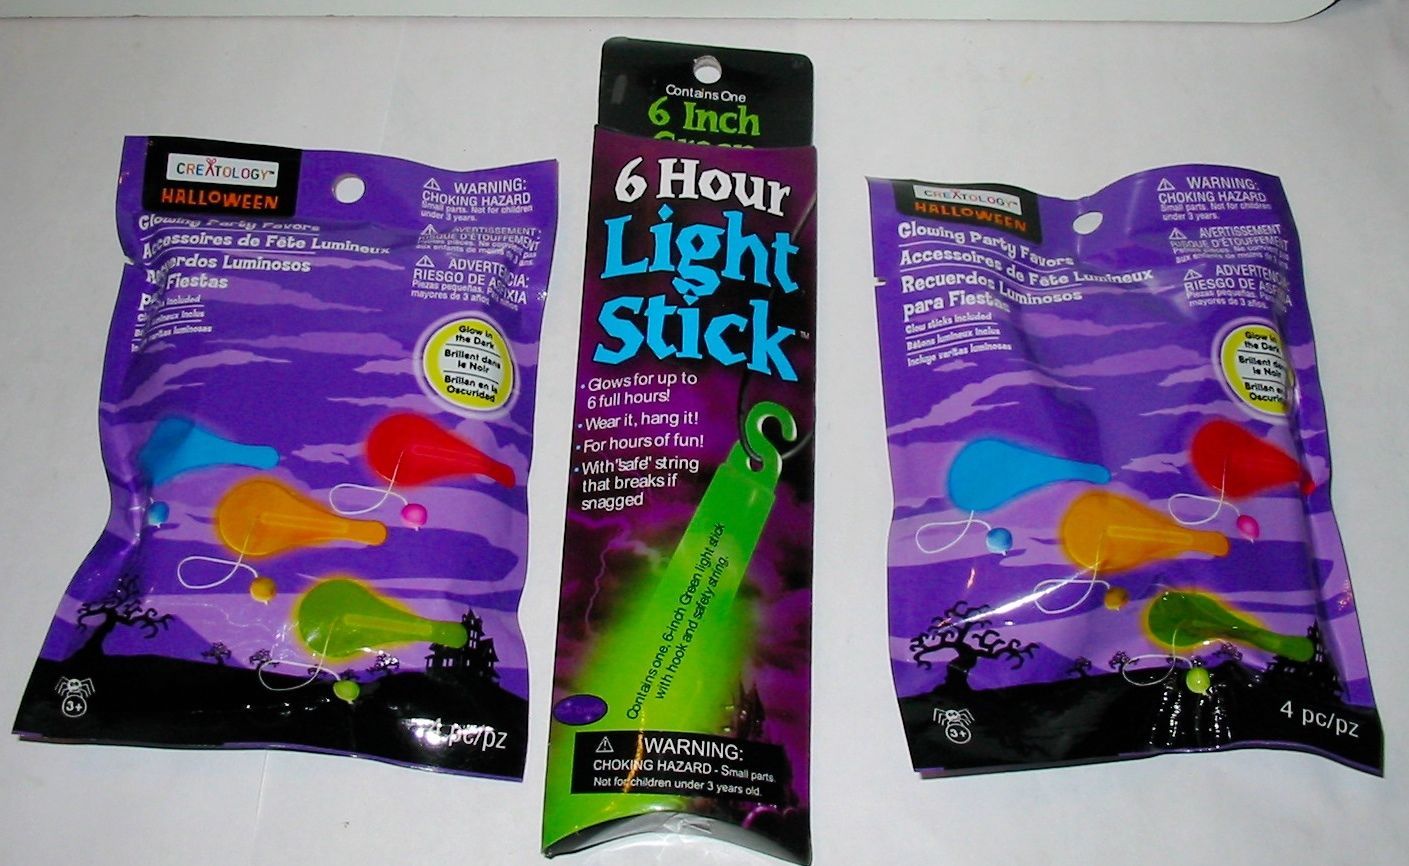 Halloween Glowing Party Favors 6" Green Light Stick Creatology 9 items total 42F - $7.89